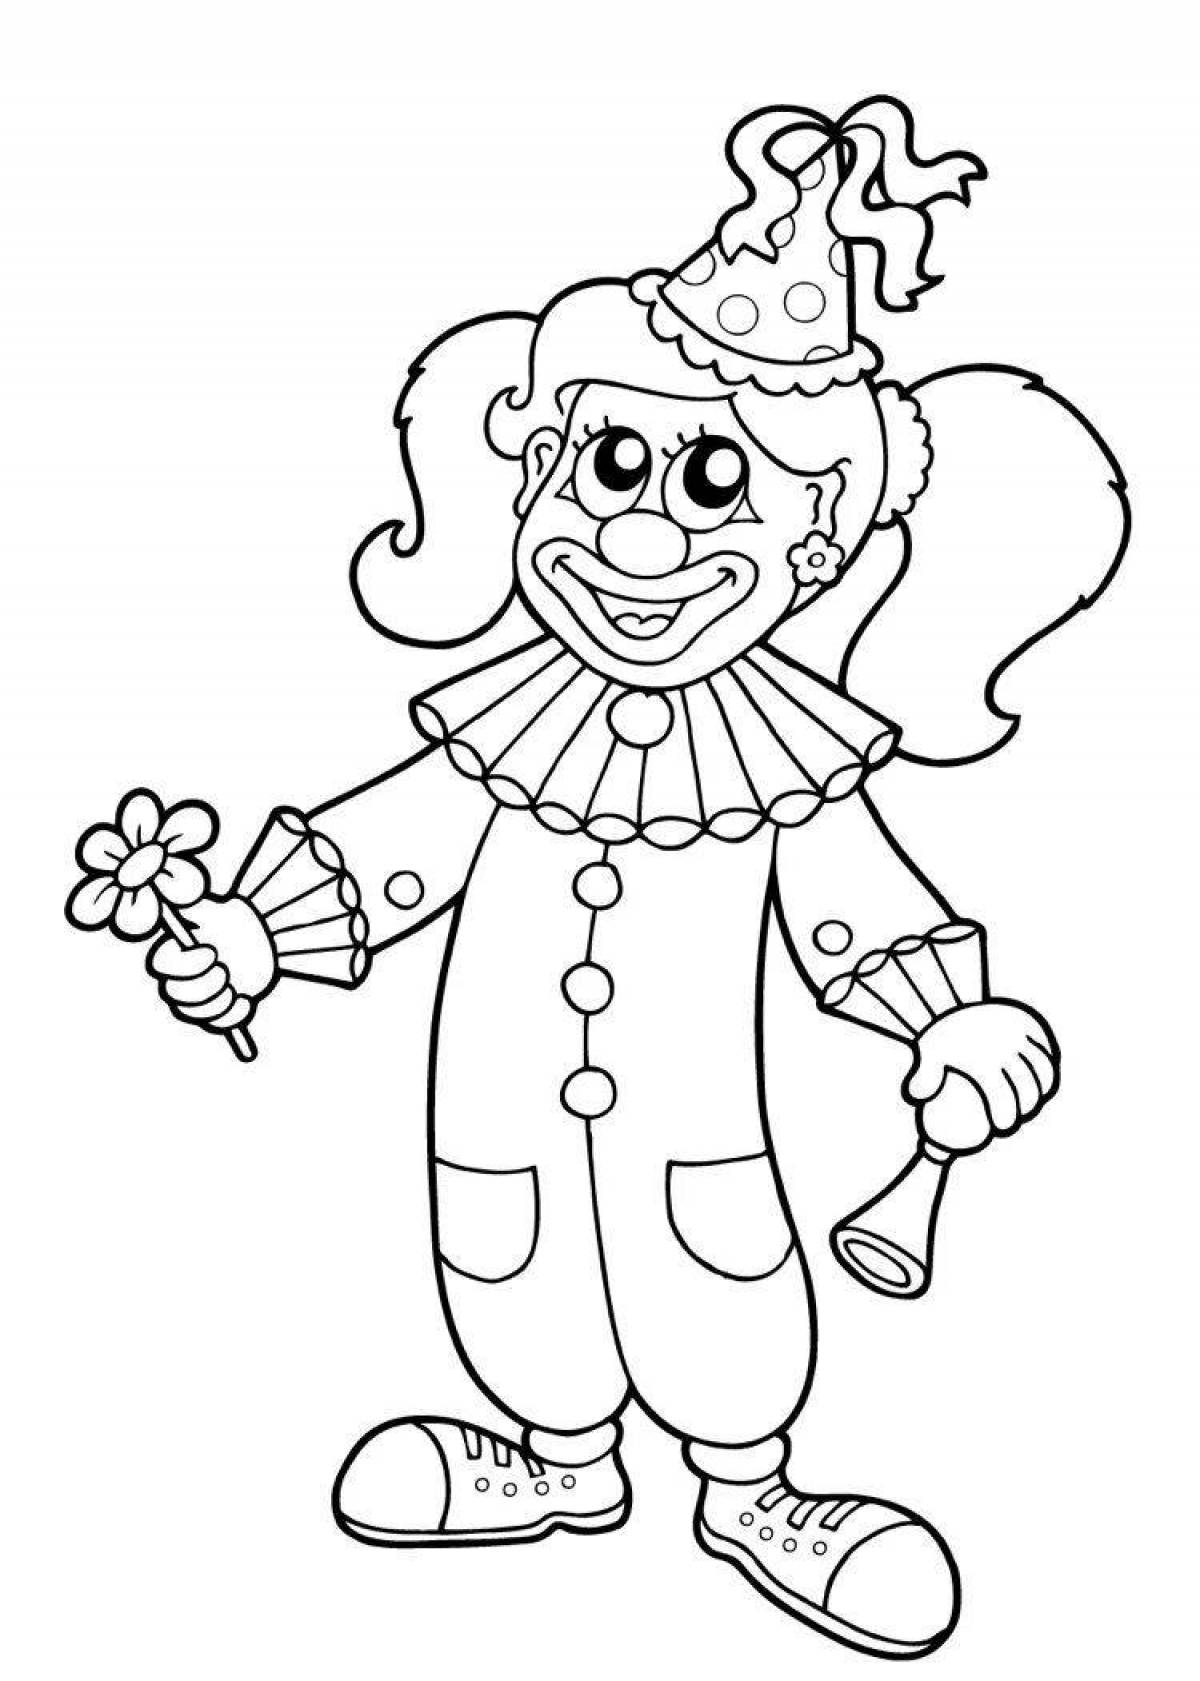 Joyful coloring on a visit to the clown